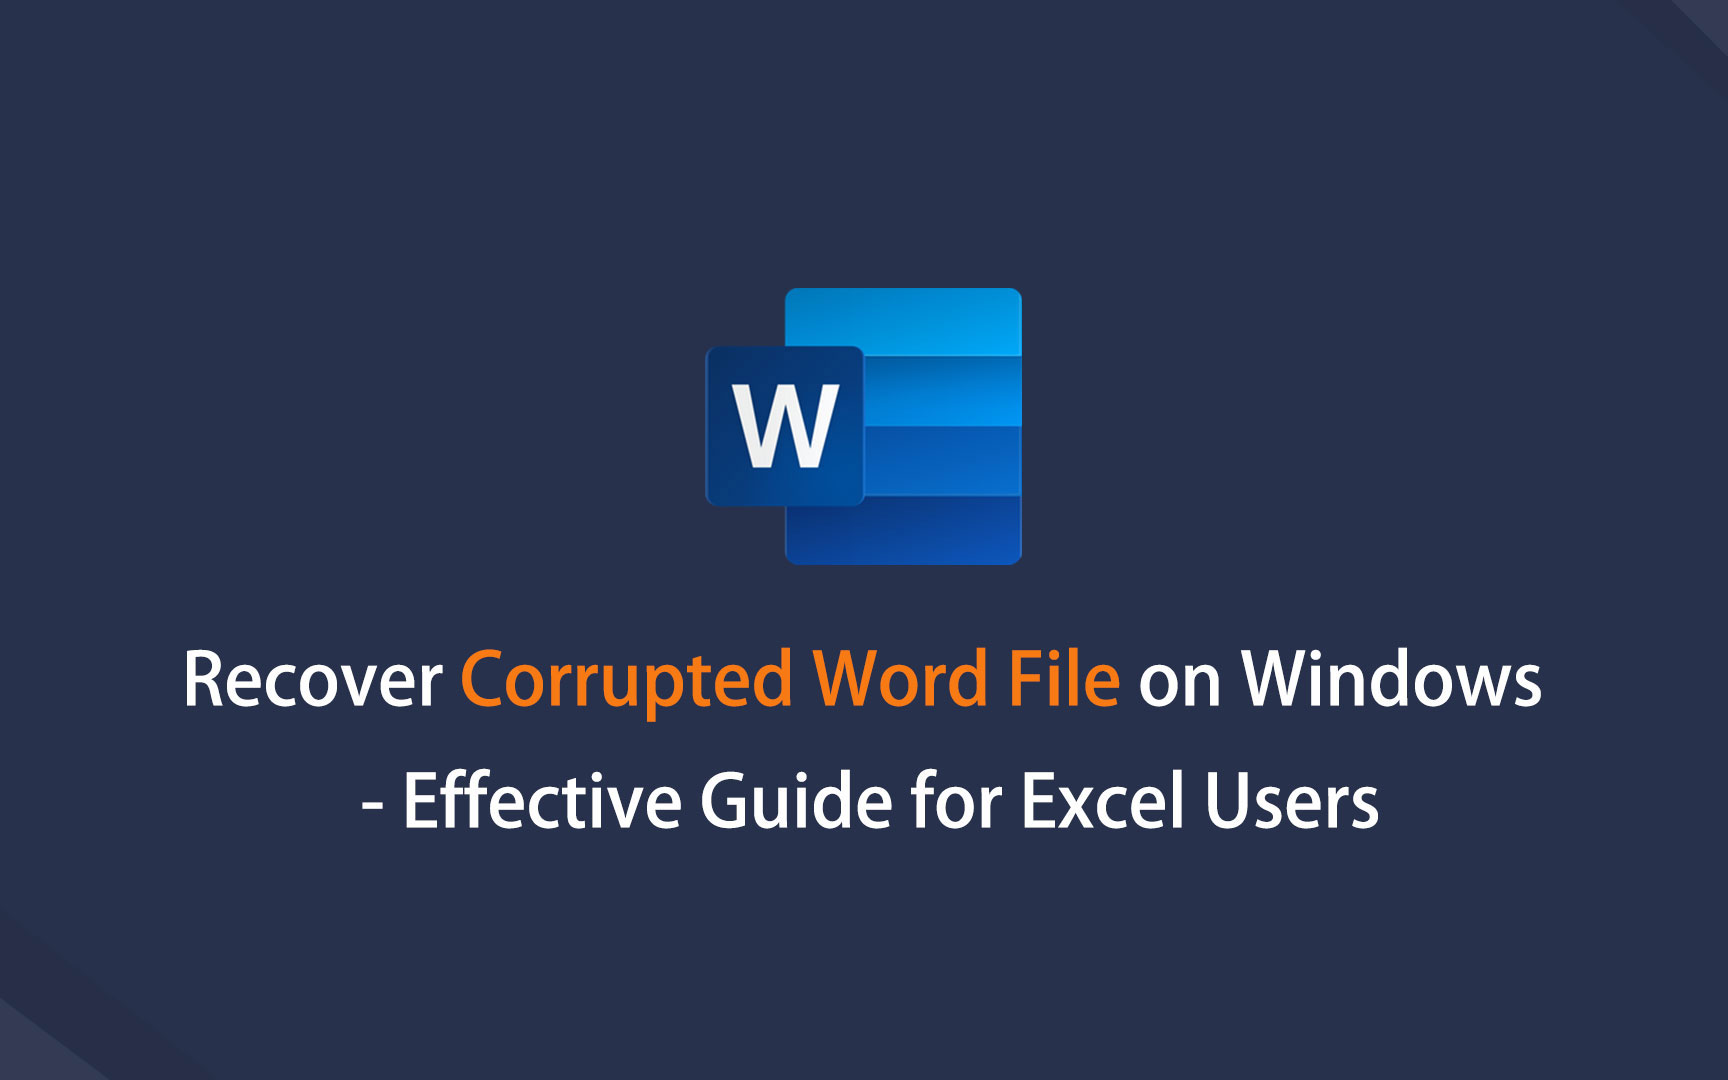 Recover Corrupted Word File on Windows